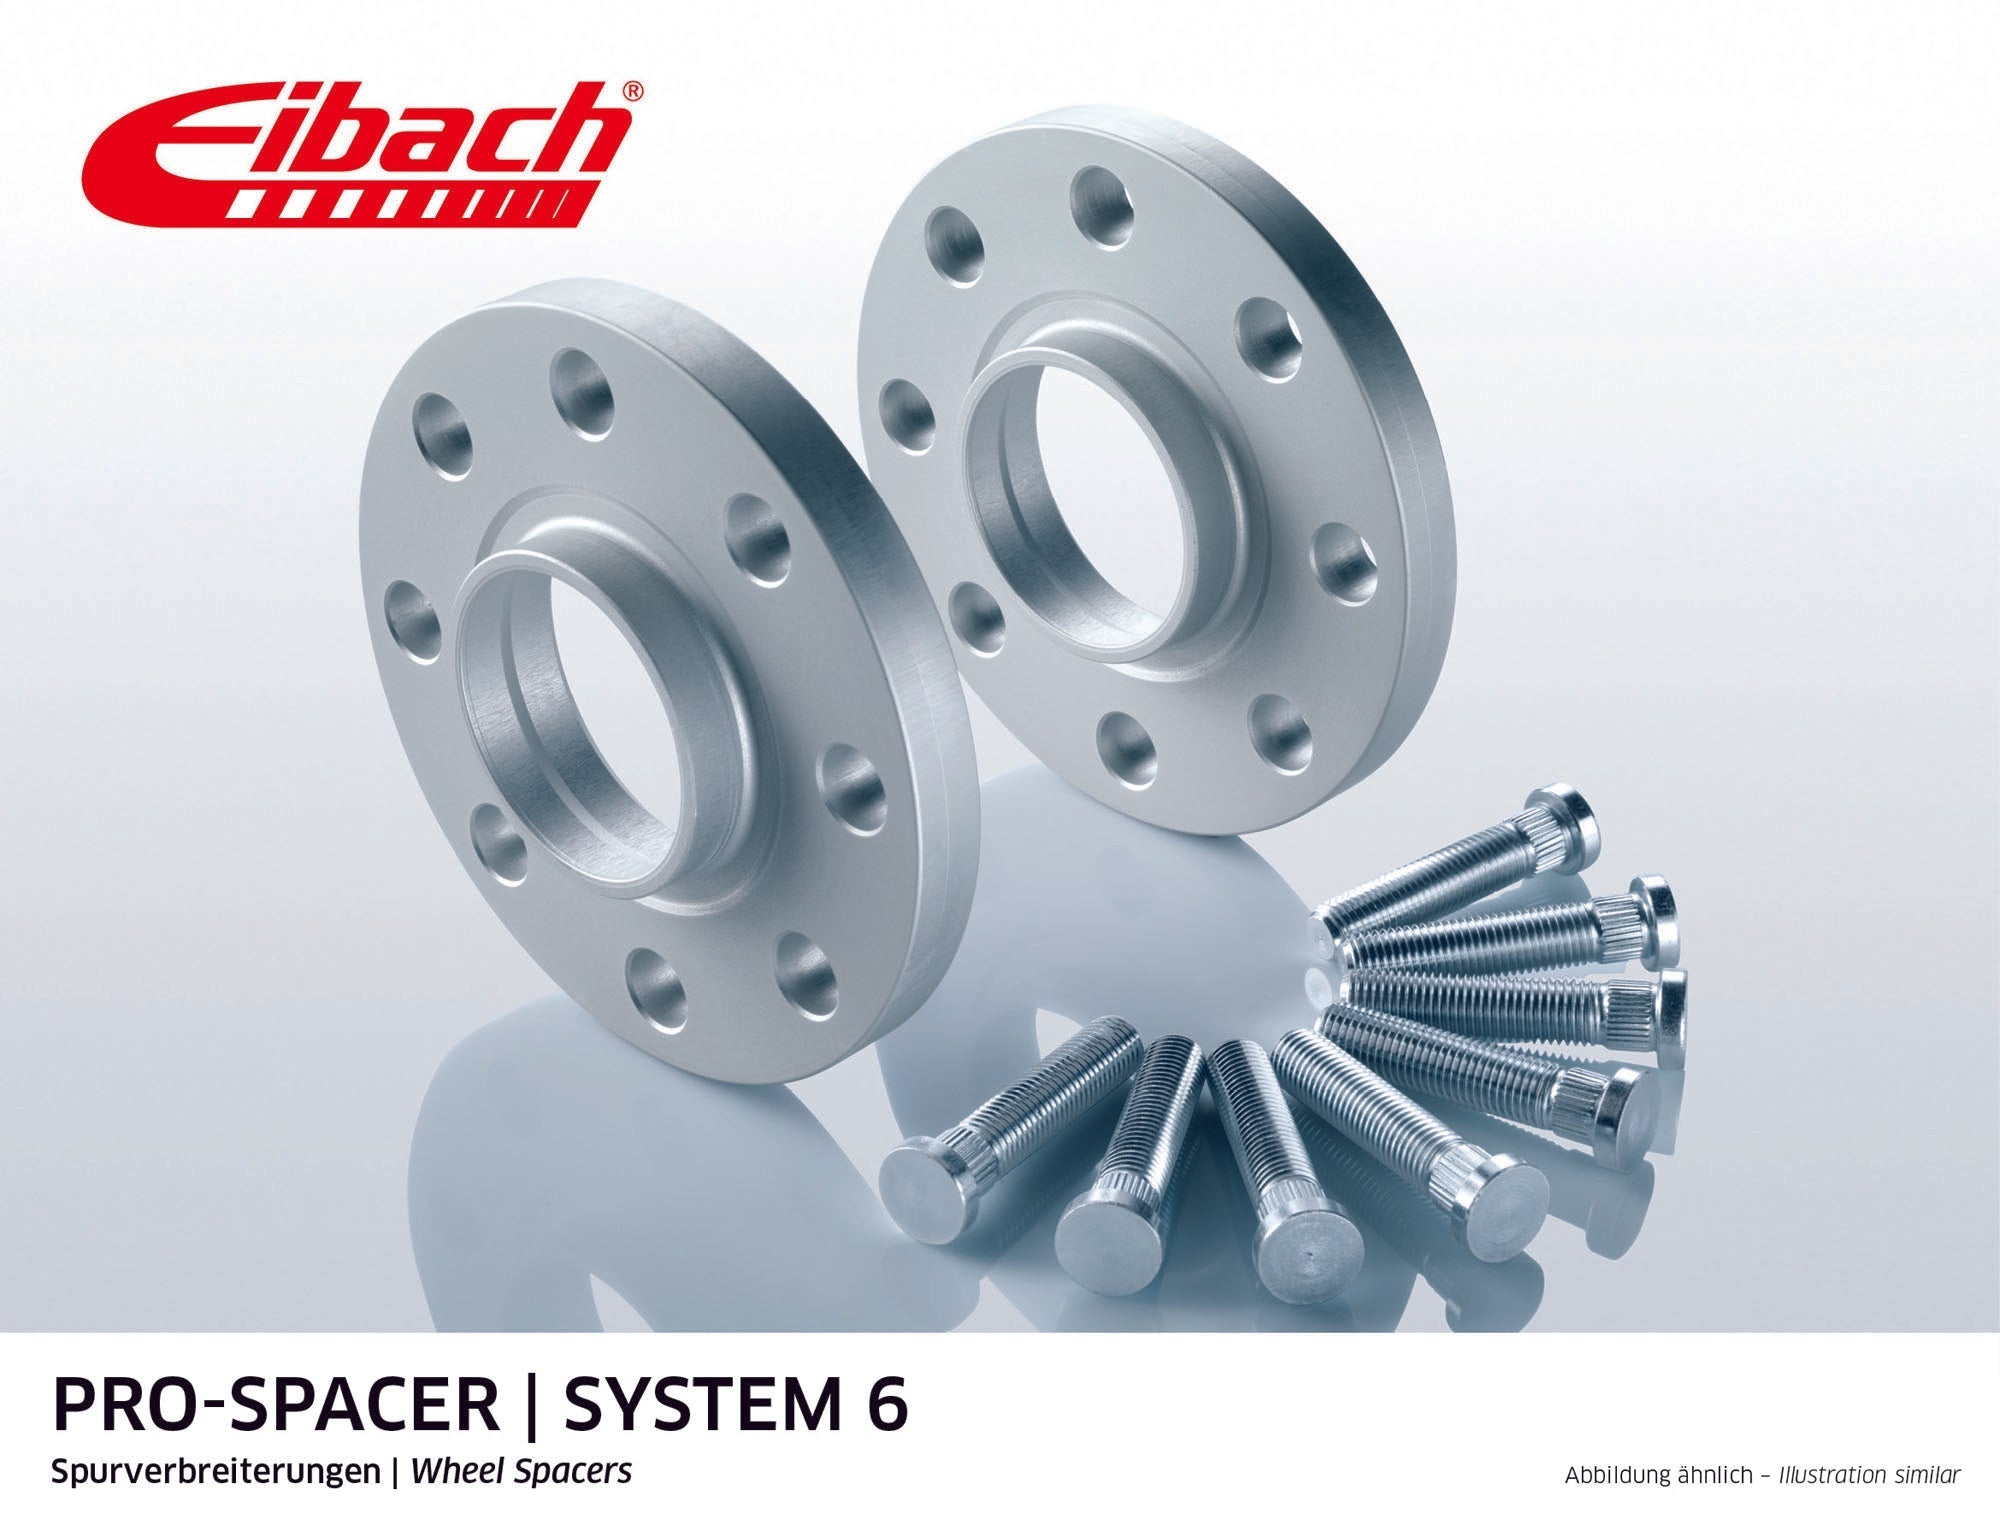 Eibach 15mm Pro-Spacer - Silver Anodized Wheel Spacer 944 1981-91 #S90-6-15-018